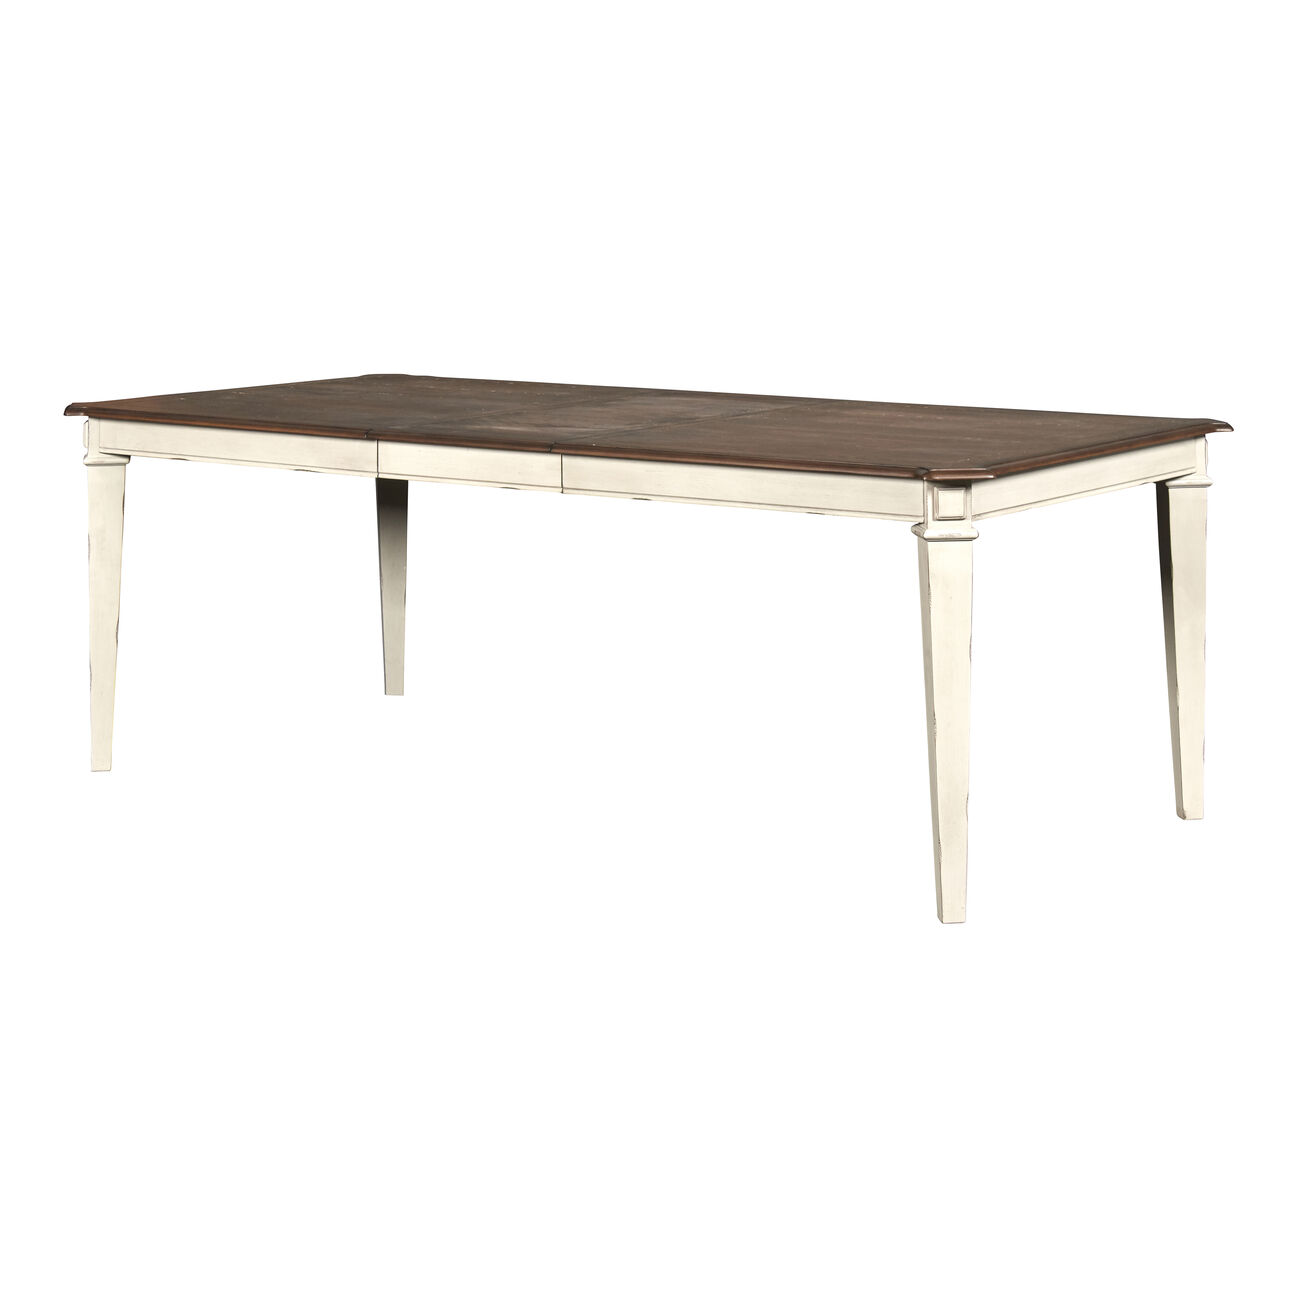 Plank Top Wooden Dining Table with Extendable Leaf, Antique white and Brown